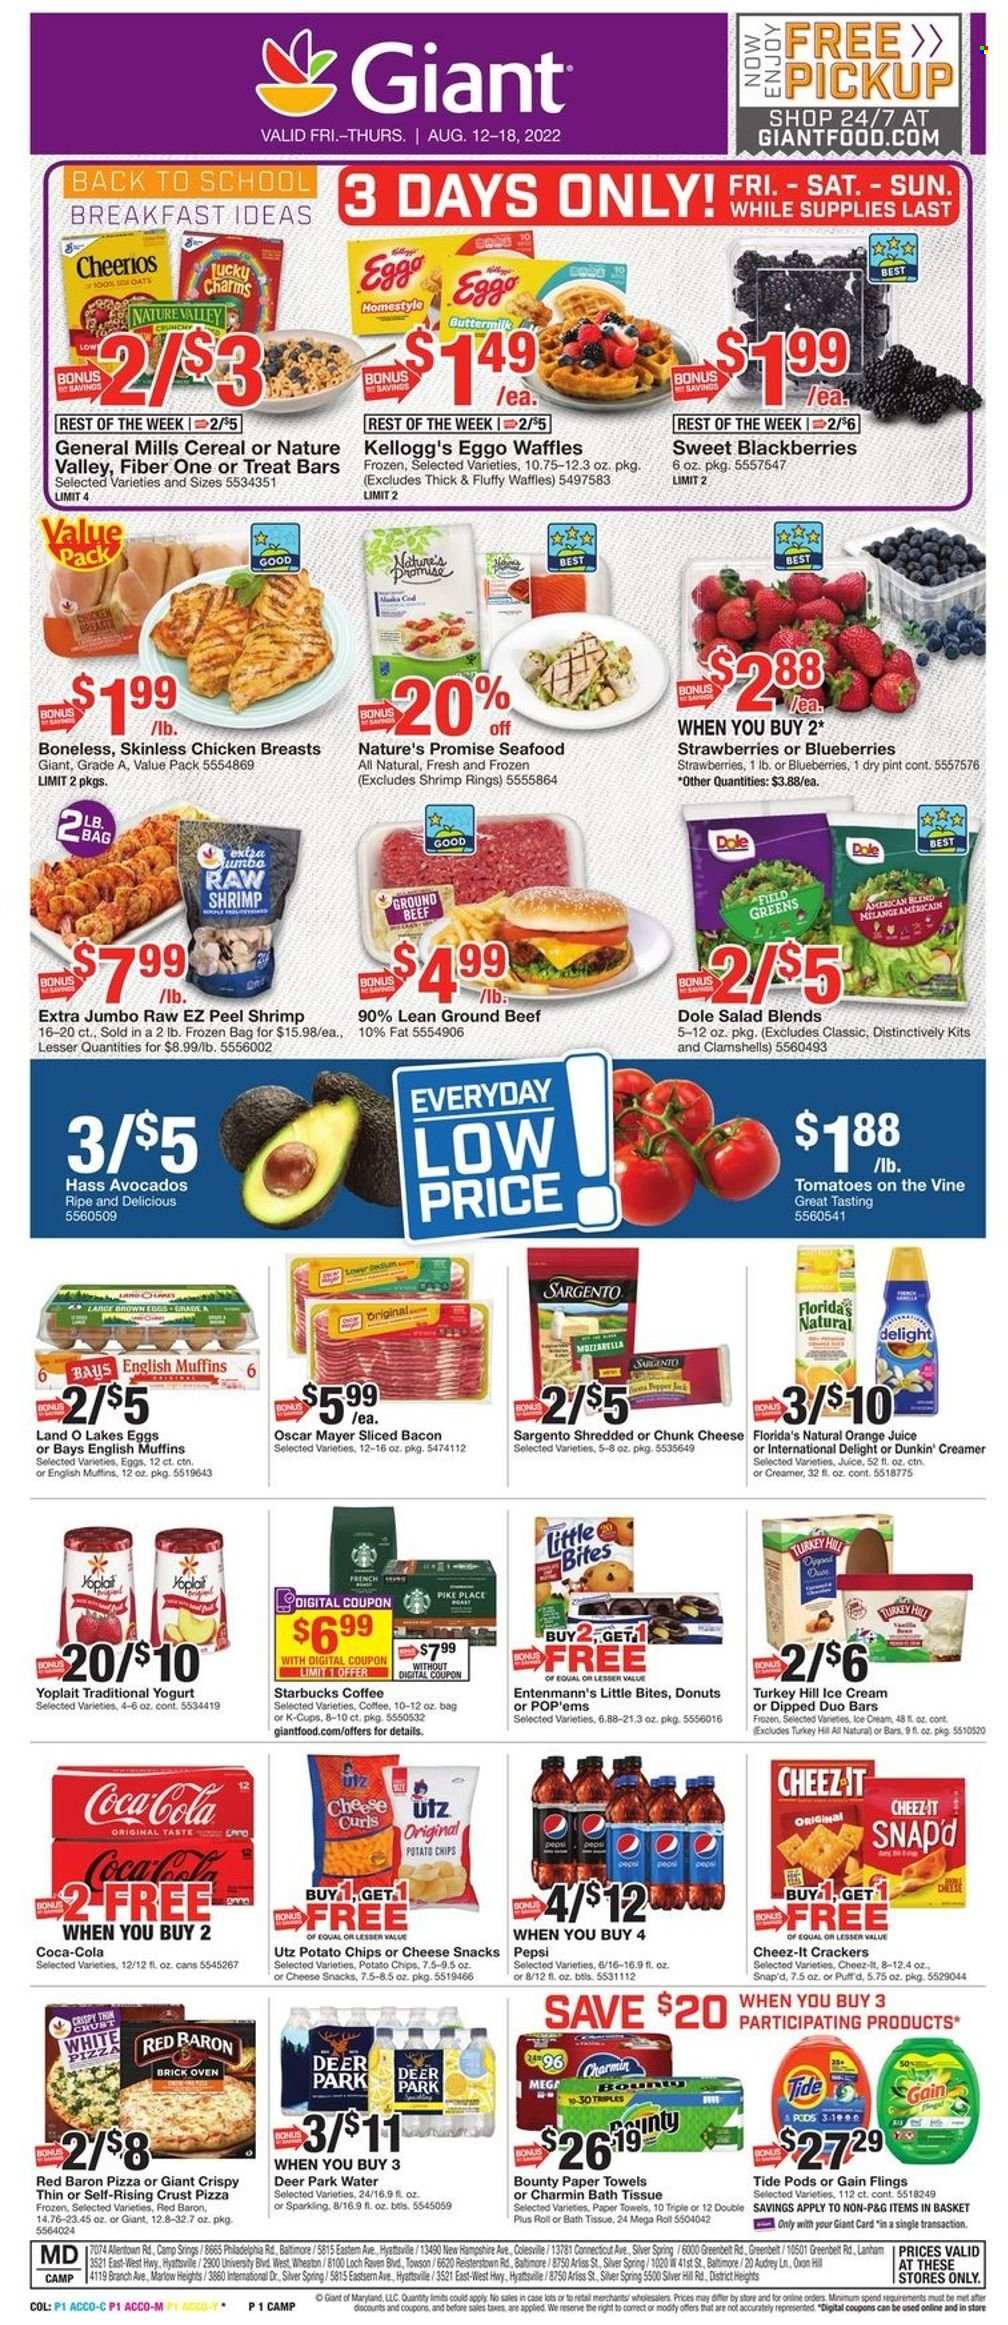 thumbnail - Giant Food Flyer - 08/12/2022 - 08/18/2022 - Sales products - english muffins, Nature’s Promise, donut, waffles, Entenmann's, salad, Dole, avocado, blackberries, blueberries, cod, seafood, shrimps, pizza, bacon, Oscar Mayer, Pepper Jack cheese, chunk cheese, Sargento, yoghurt, Yoplait, buttermilk, eggs, creamer, ice cream, Red Baron, snack, Bounty, crackers, Kellogg's, Little Bites, Florida's Natural, potato chips, Cheez-It, oats, cereals, Cheerios, Nature Valley, Fiber One, Coca-Cola, Pepsi, orange juice, juice, coffee, Starbucks, coffee capsules, K-Cups, chicken breasts, beef meat, ground beef, bath tissue, kitchen towels, paper towels, Charmin, Gain, Tide, basket. Page 1.